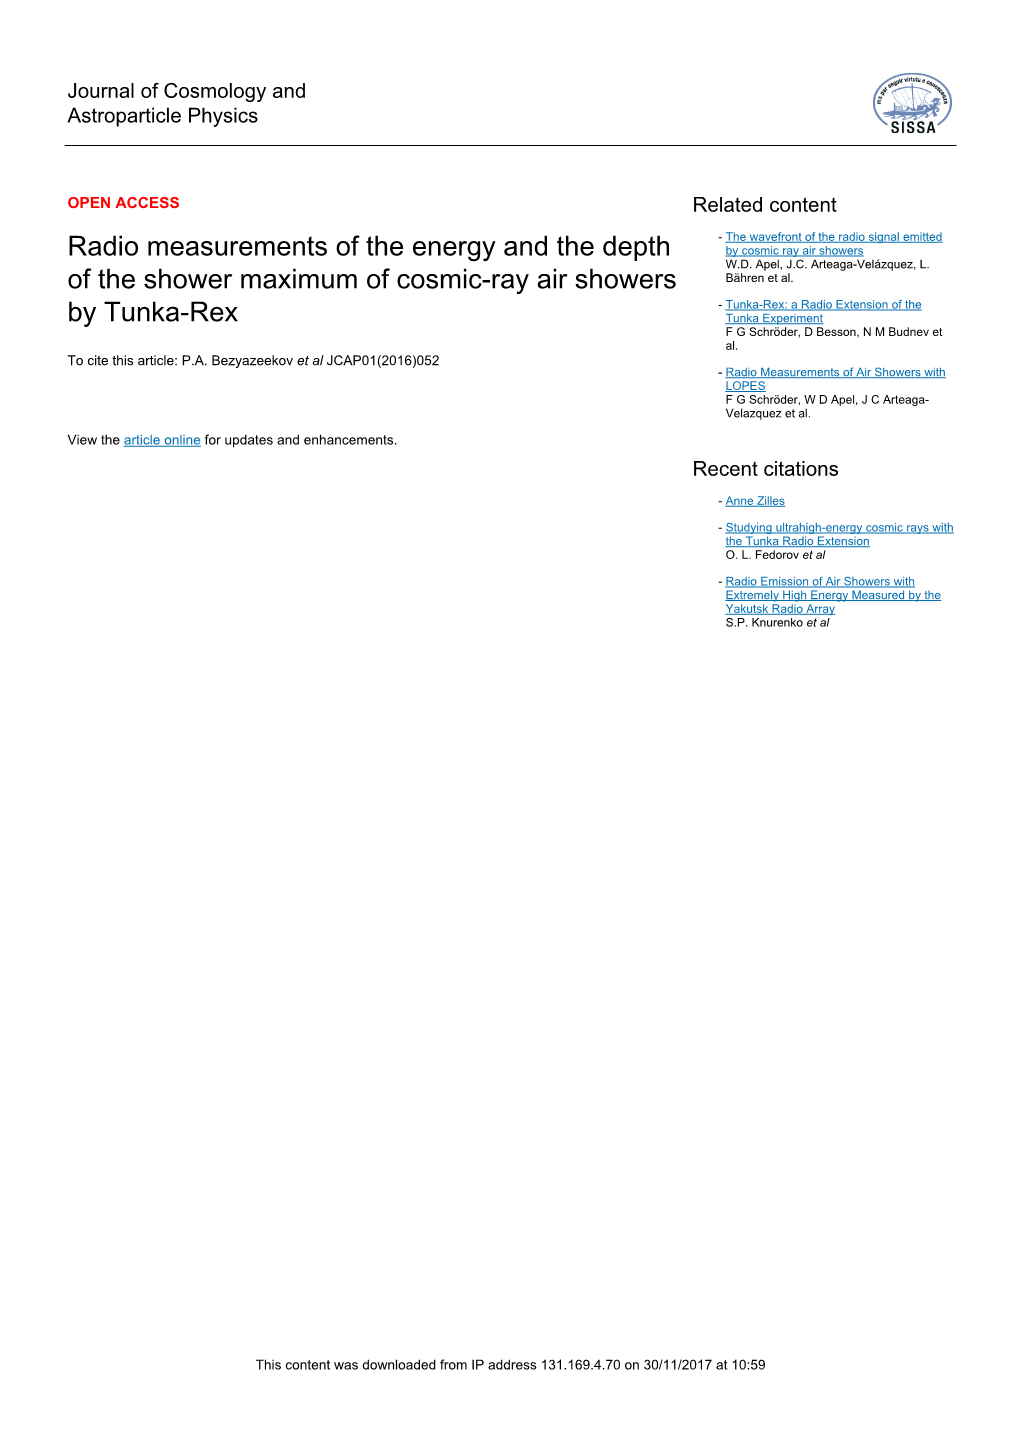 Radio Measurements of the Energy and the Depth of The